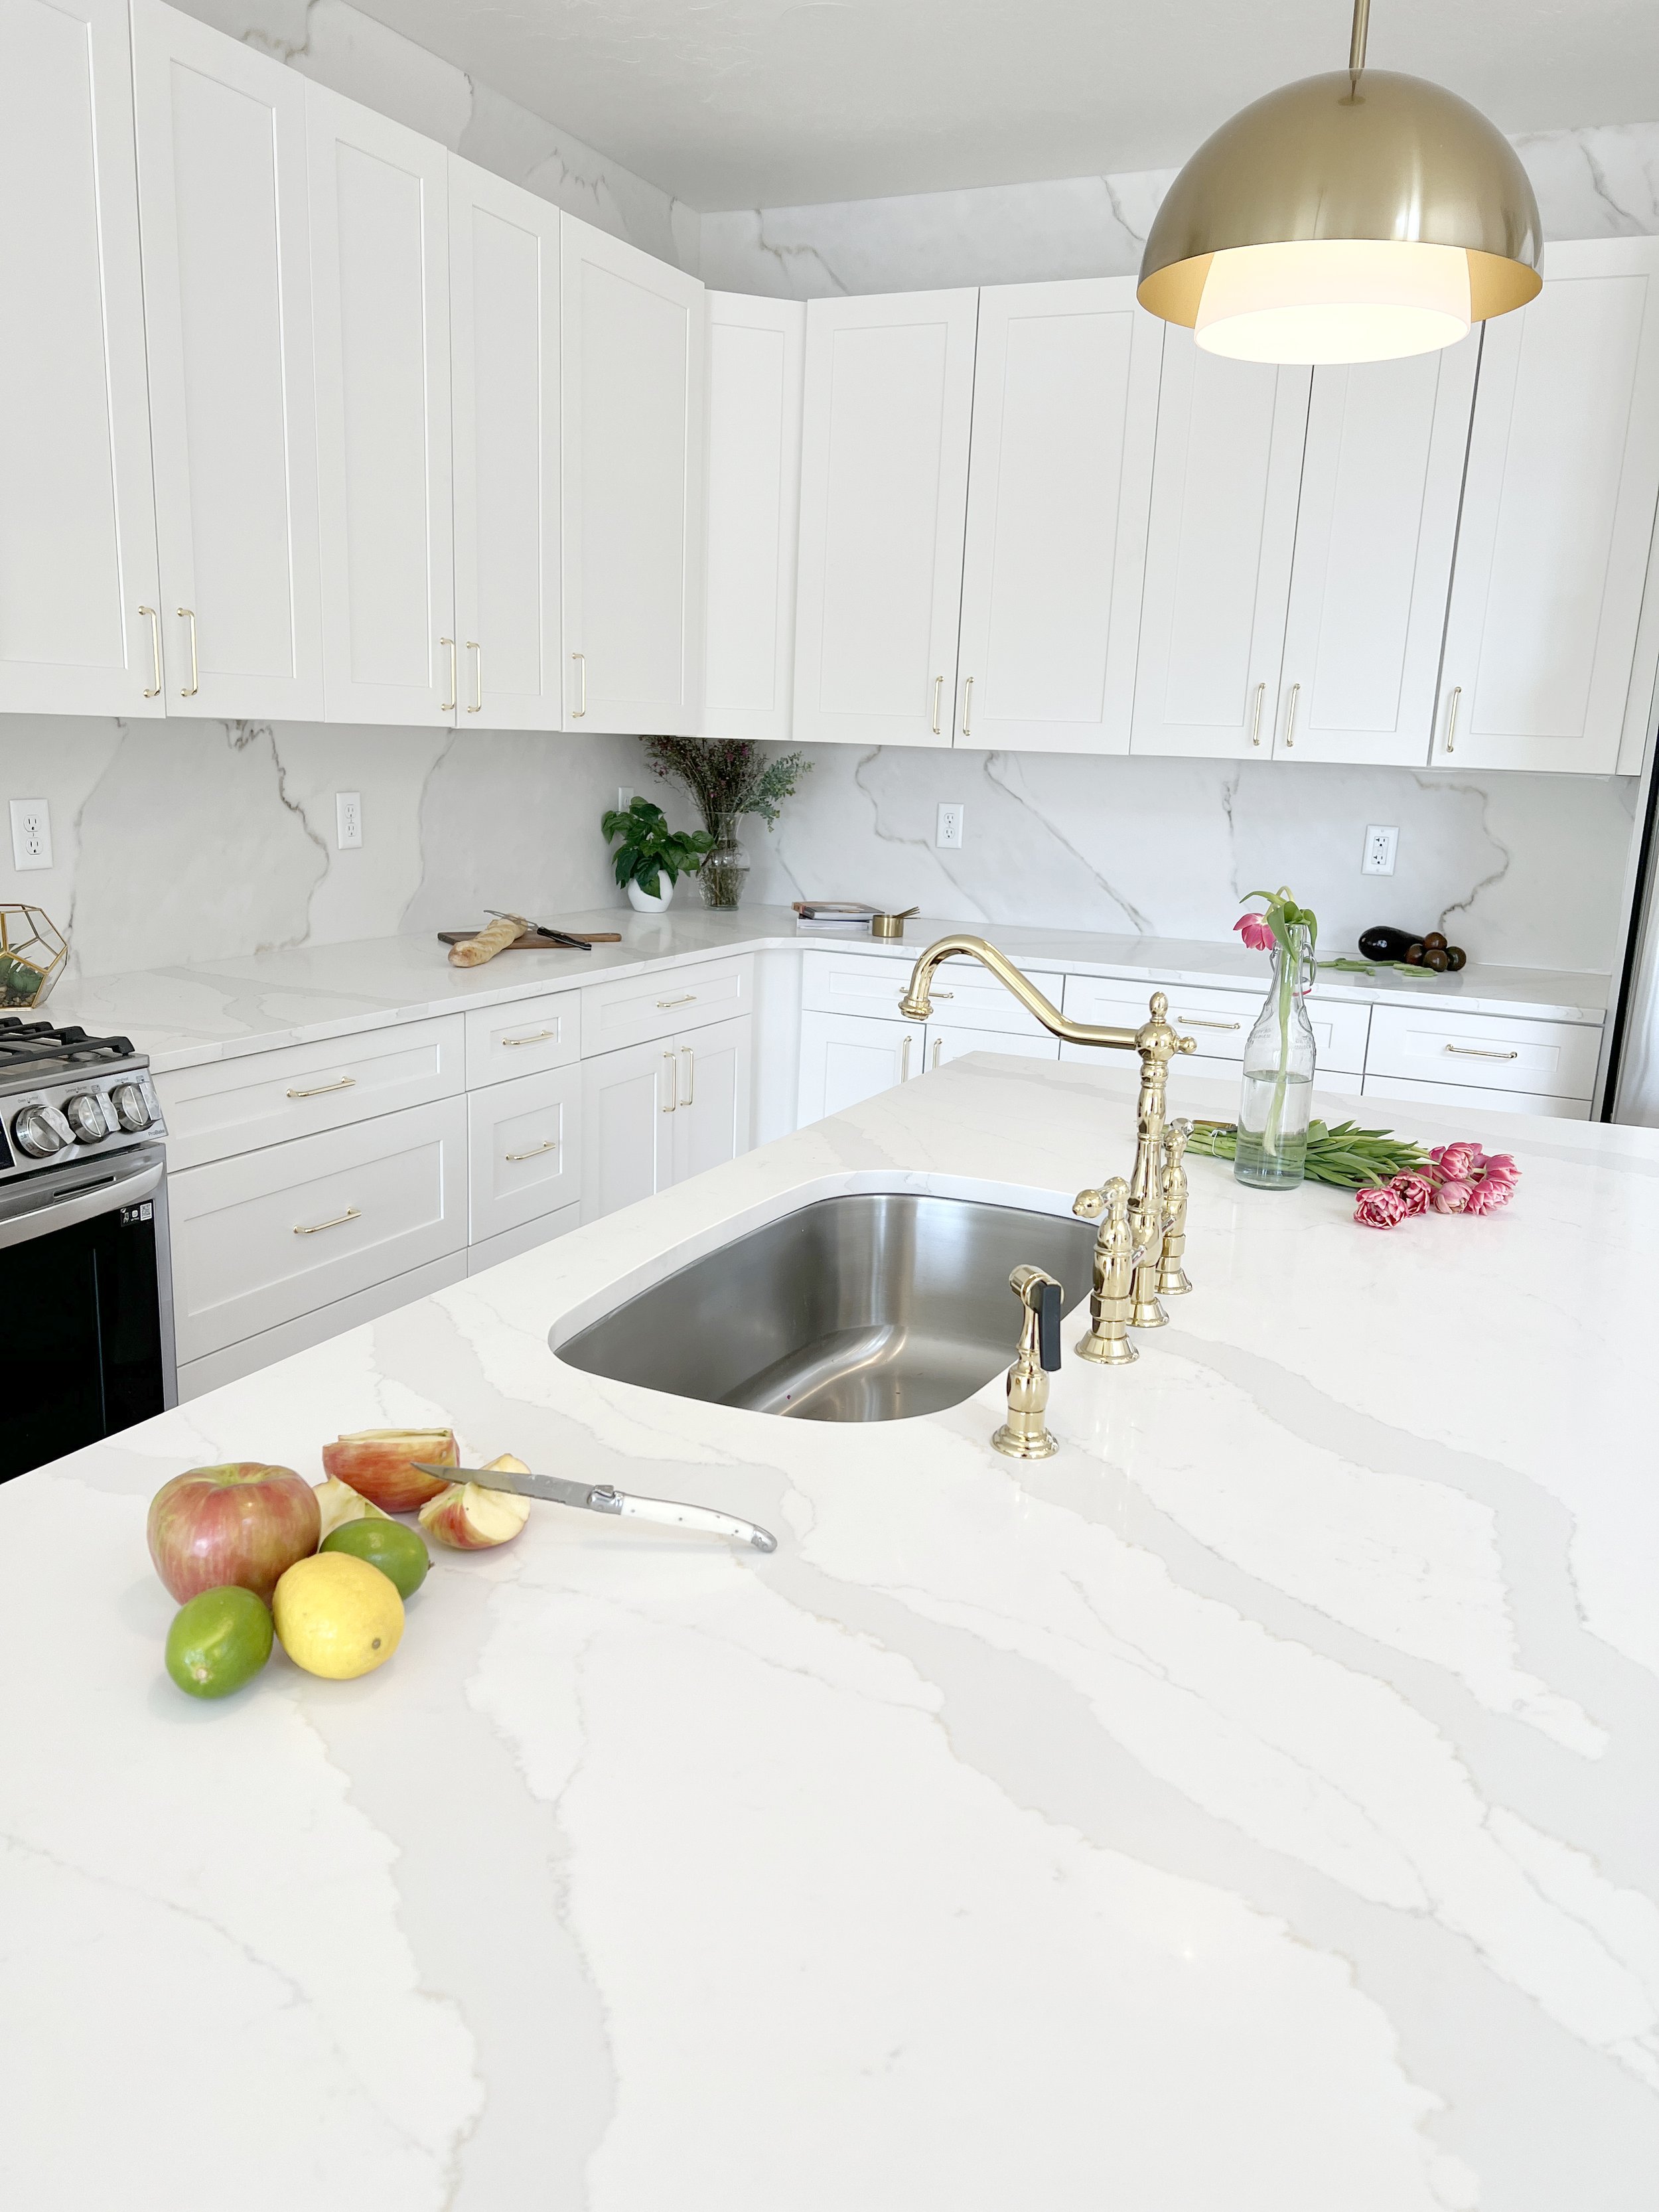 How to Remove Hard Water Stains from a Quartz Countertop